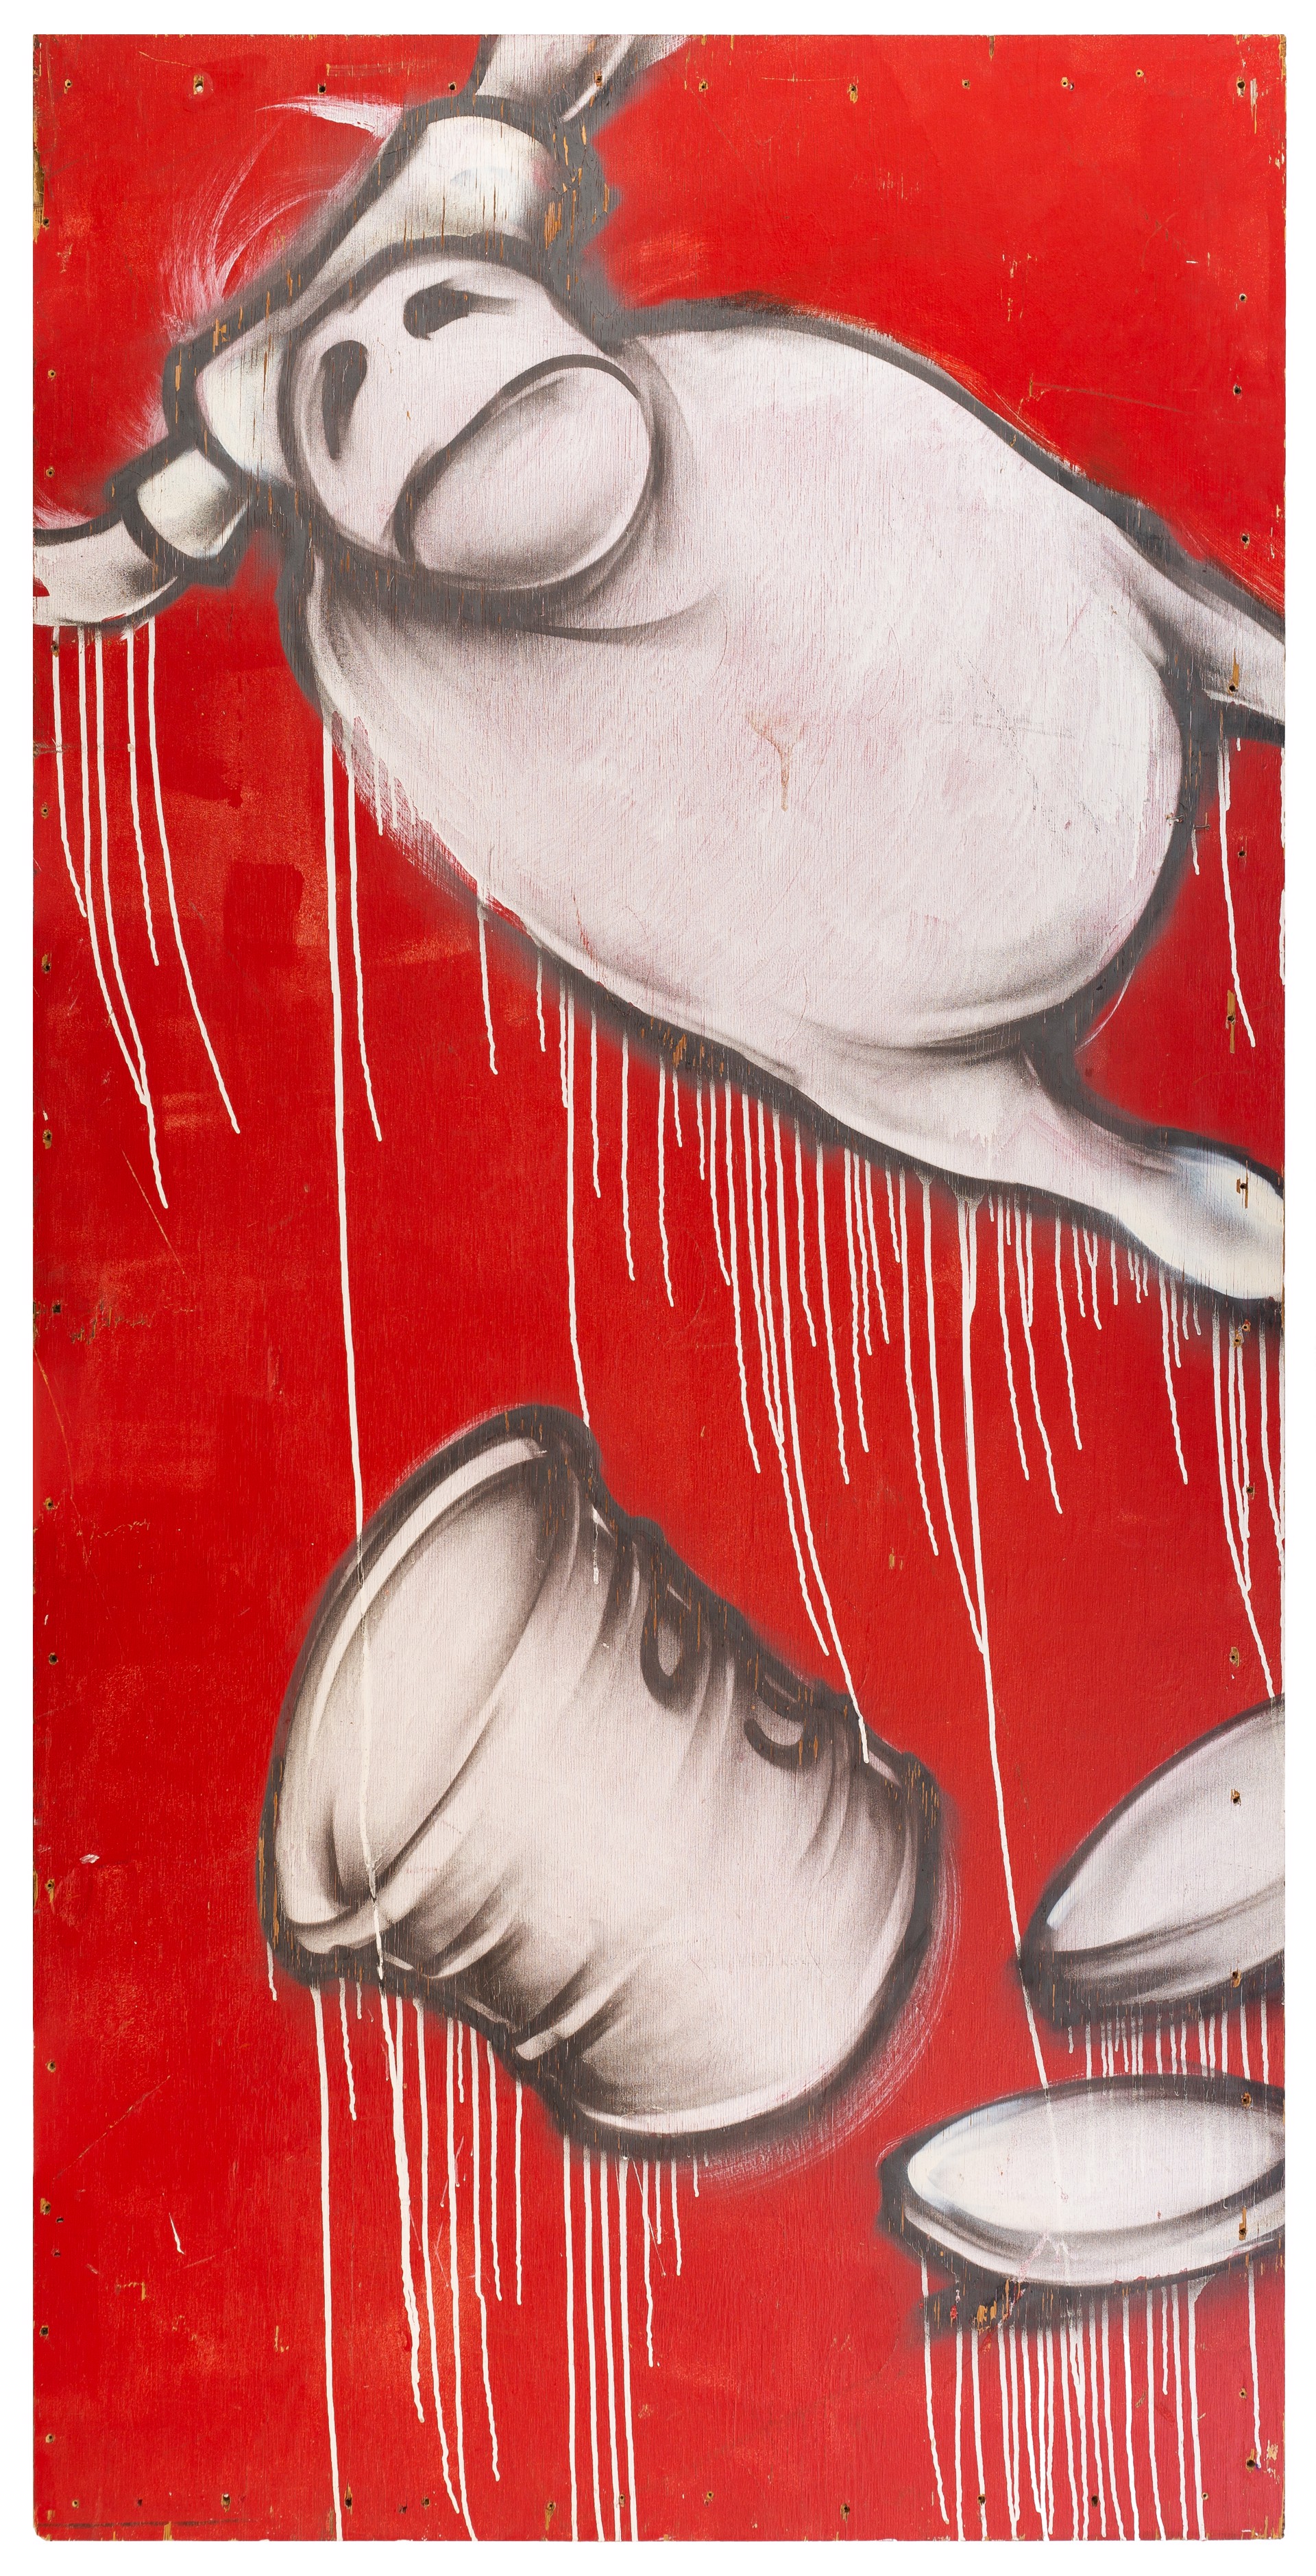 Untitled (Bull) by Barry McGee